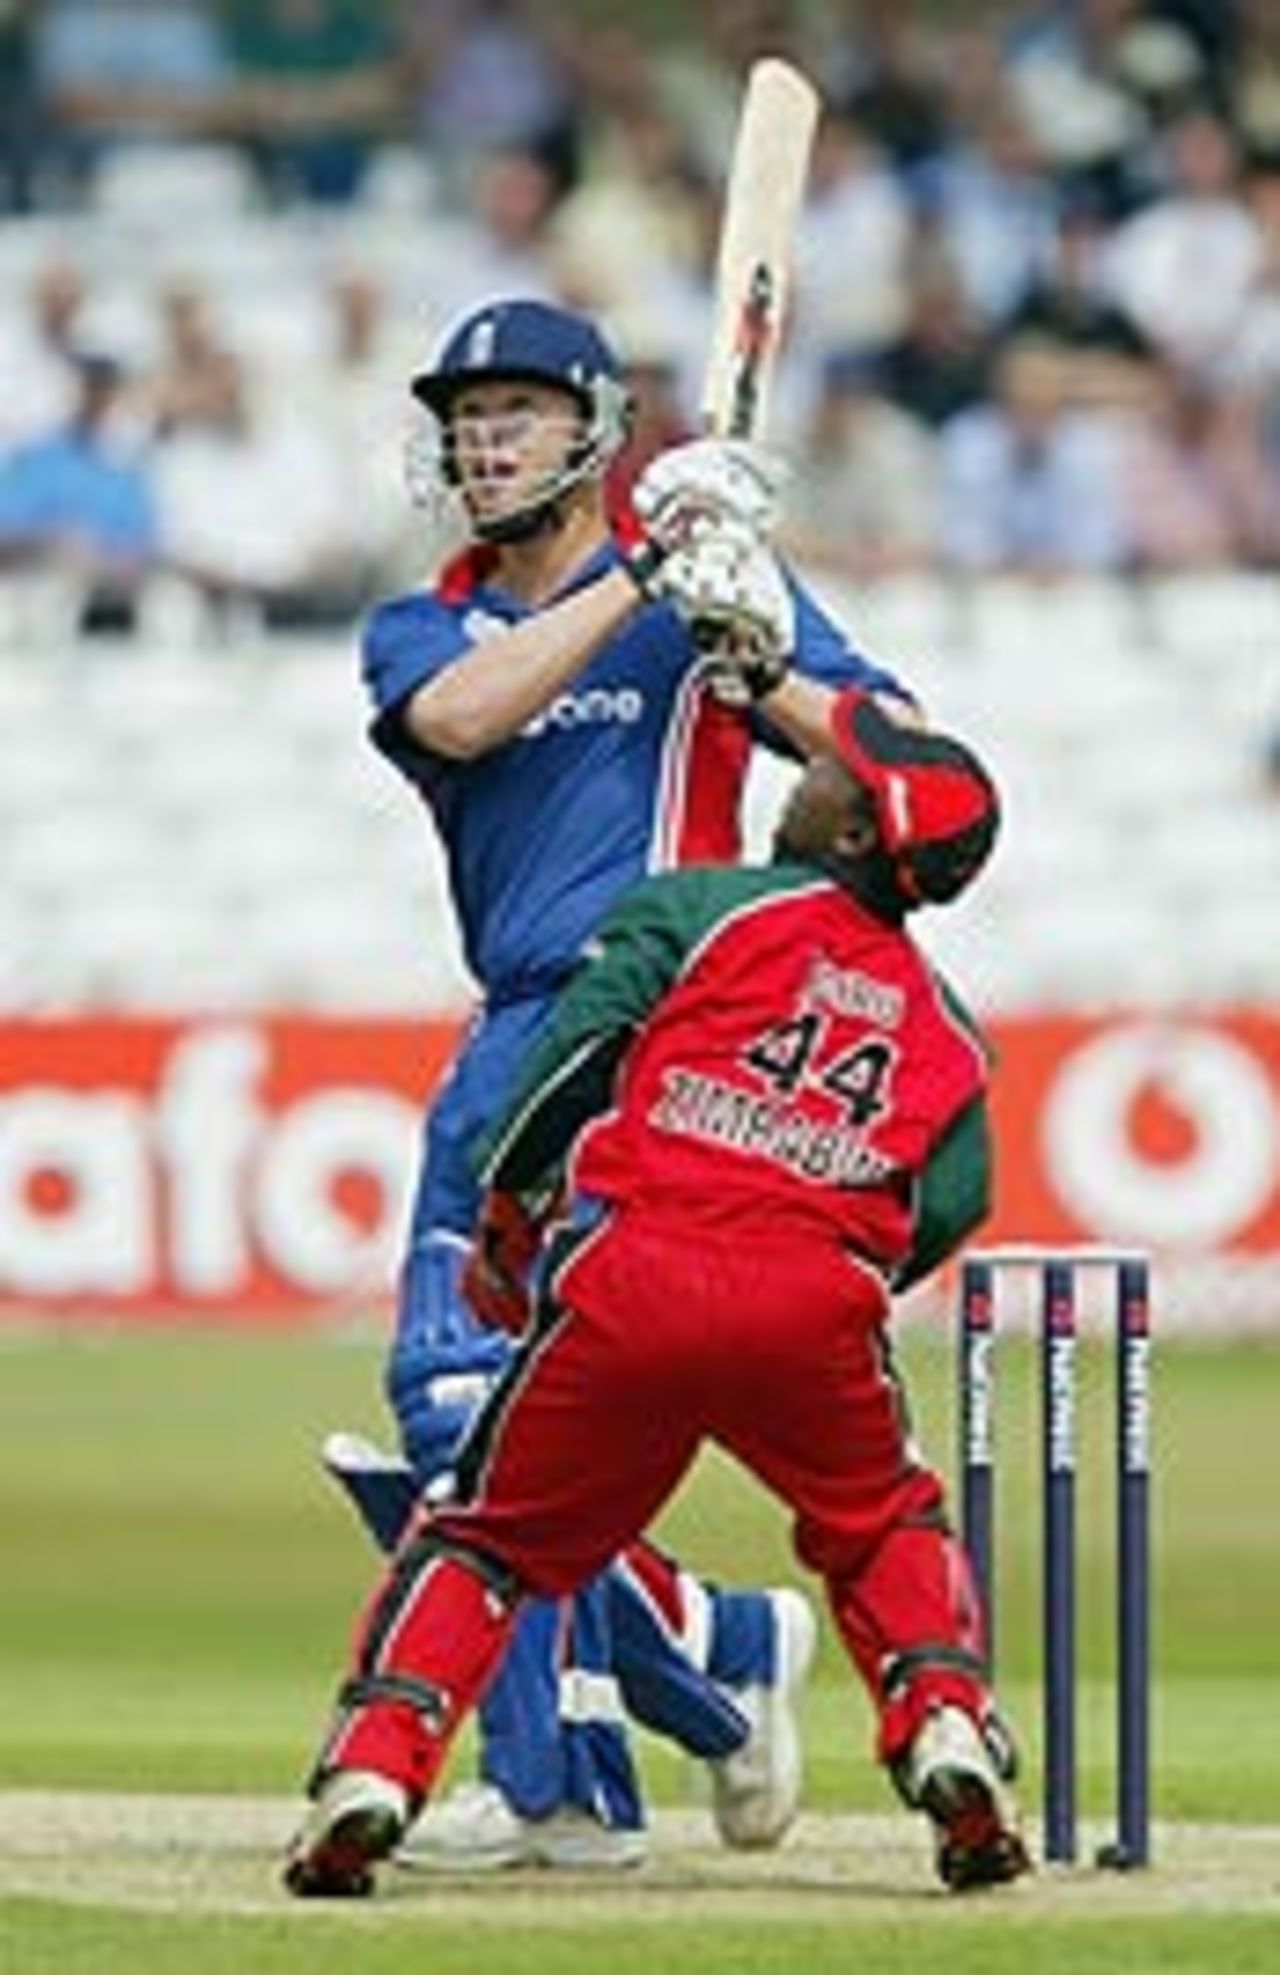 Andrew Flintoff hits out on his way to 53, England v Zimbabwe, June 26, 2003